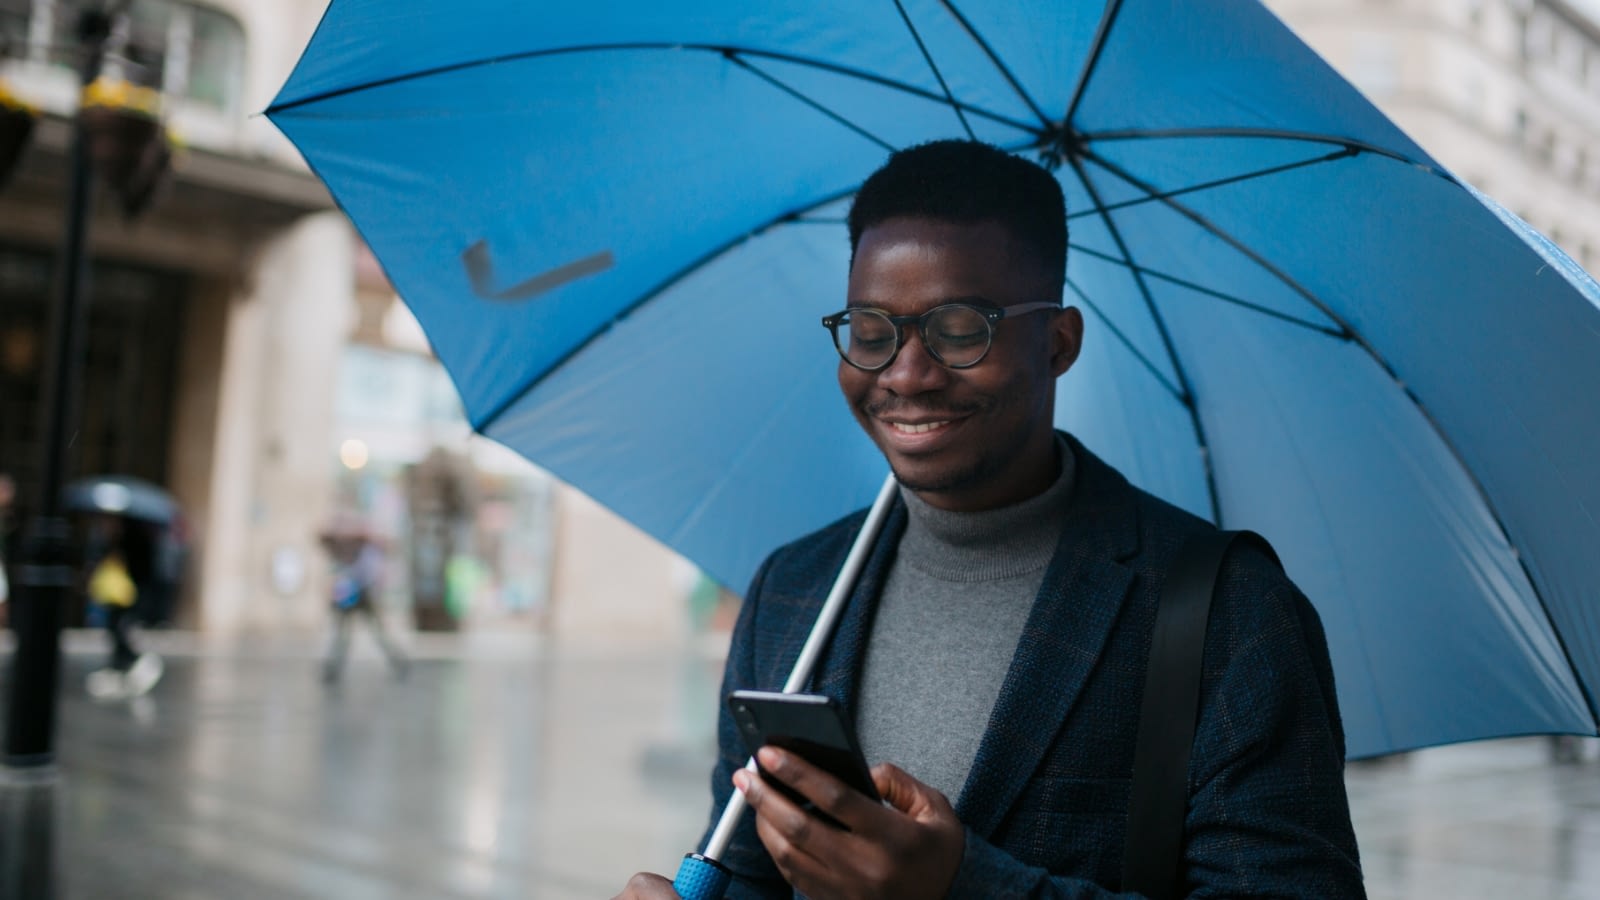 young man holding an umbrella in the rain while looking at his phone